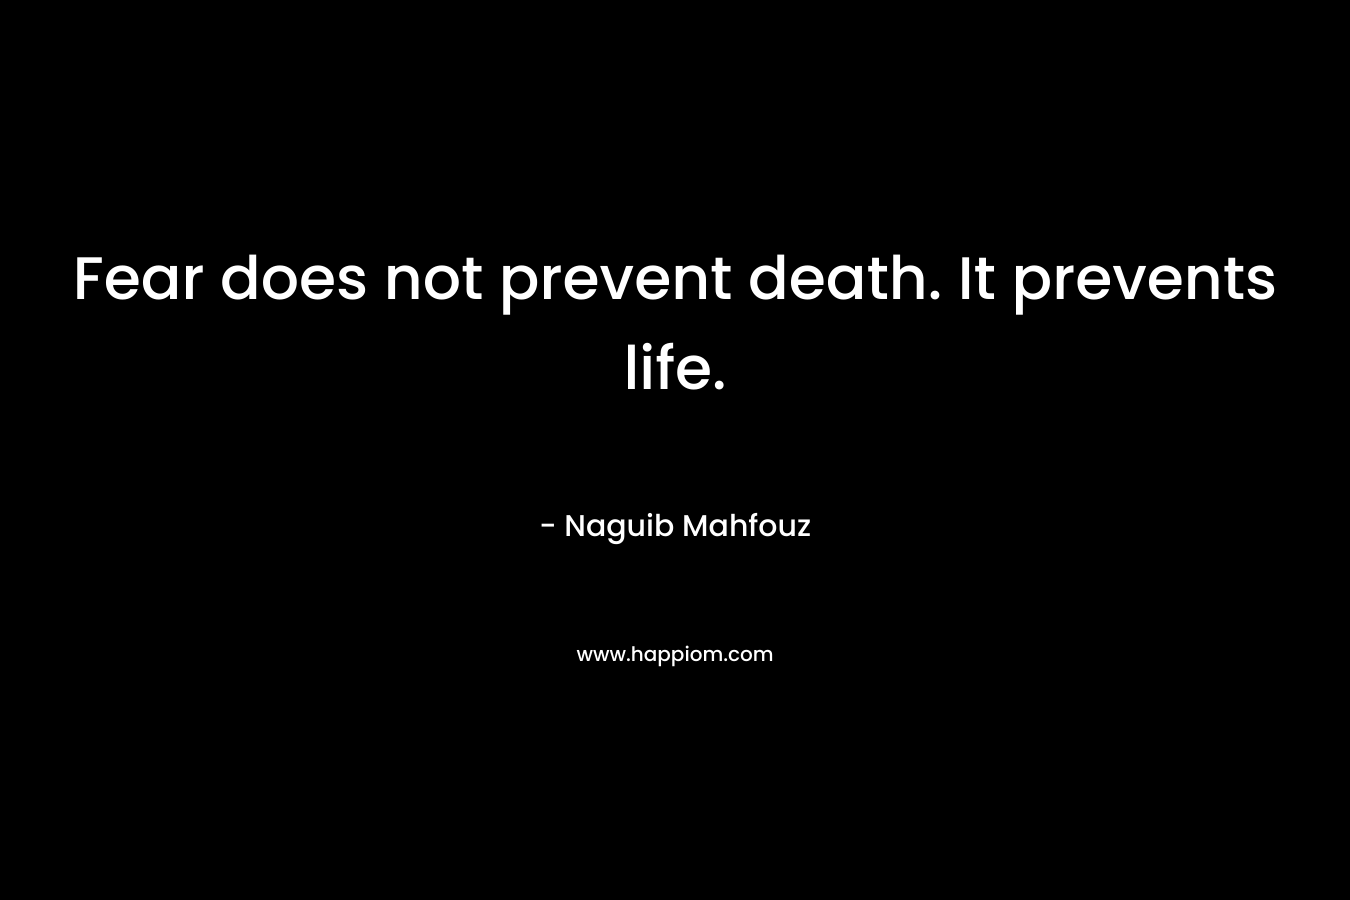 Fear does not prevent death. It prevents life.